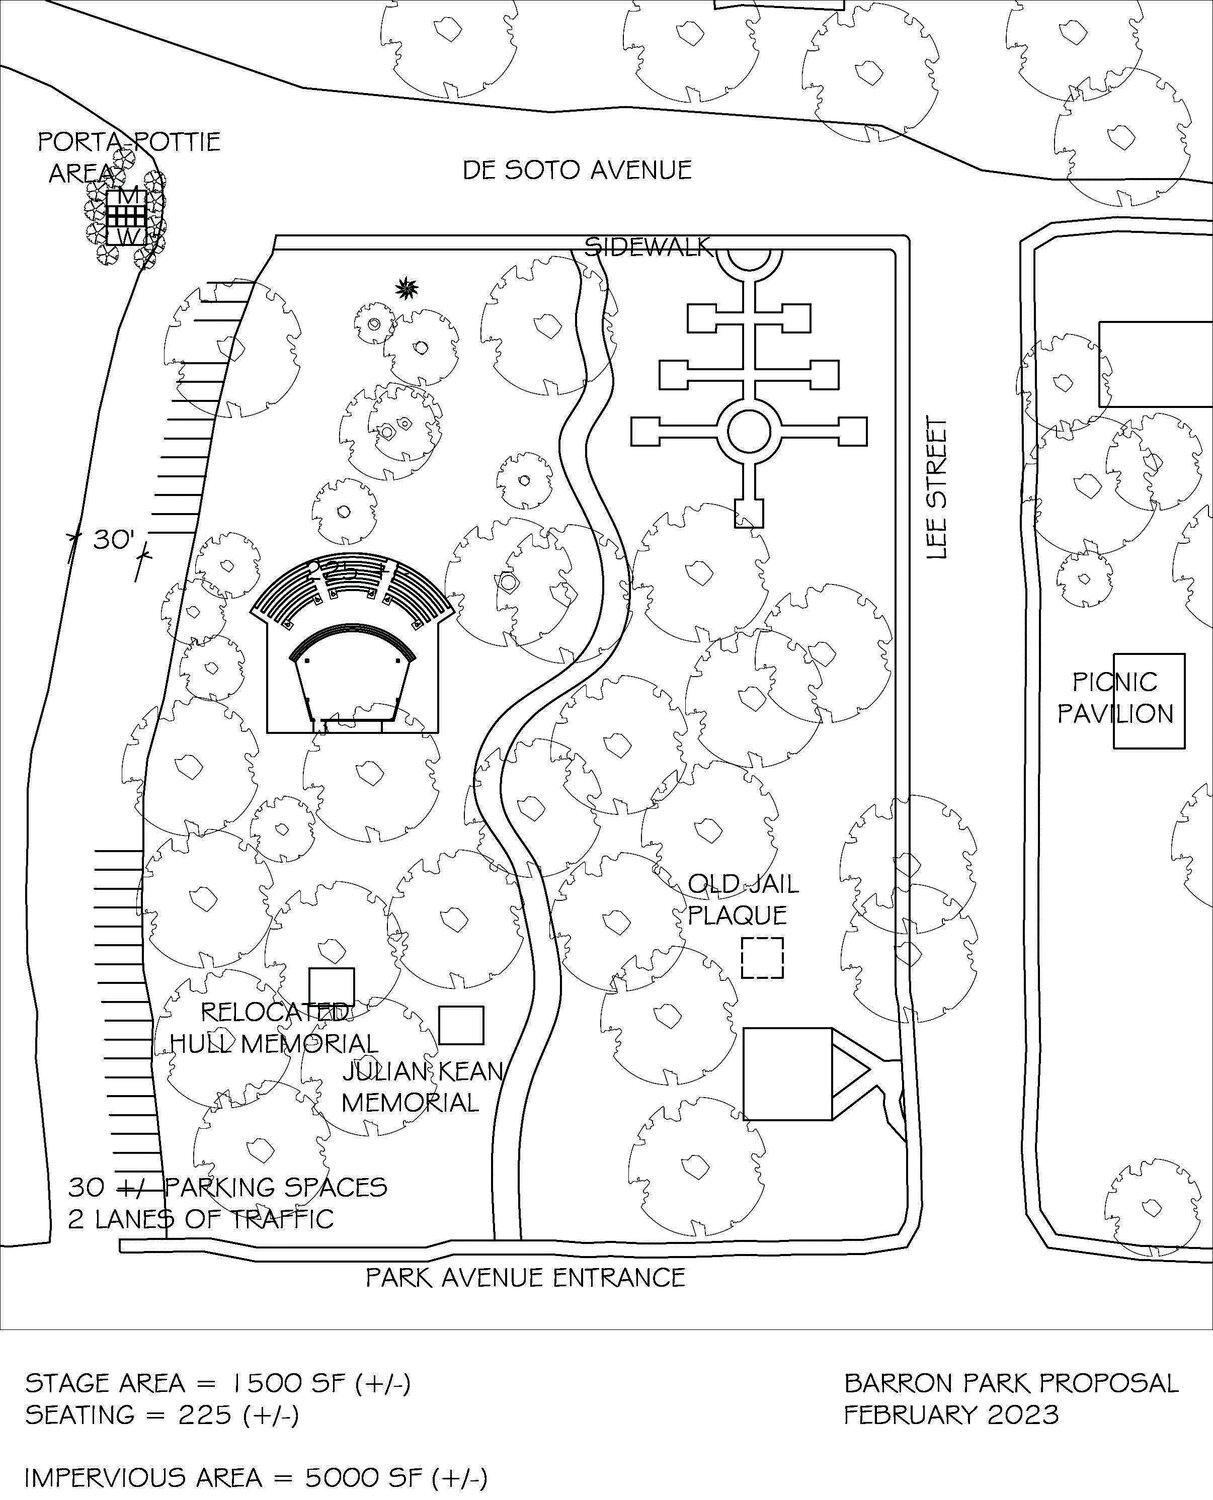 LABELLE -- Plans for changes to Barron Park were discussed at the June 8 meeting of the LaBelle City Commission.